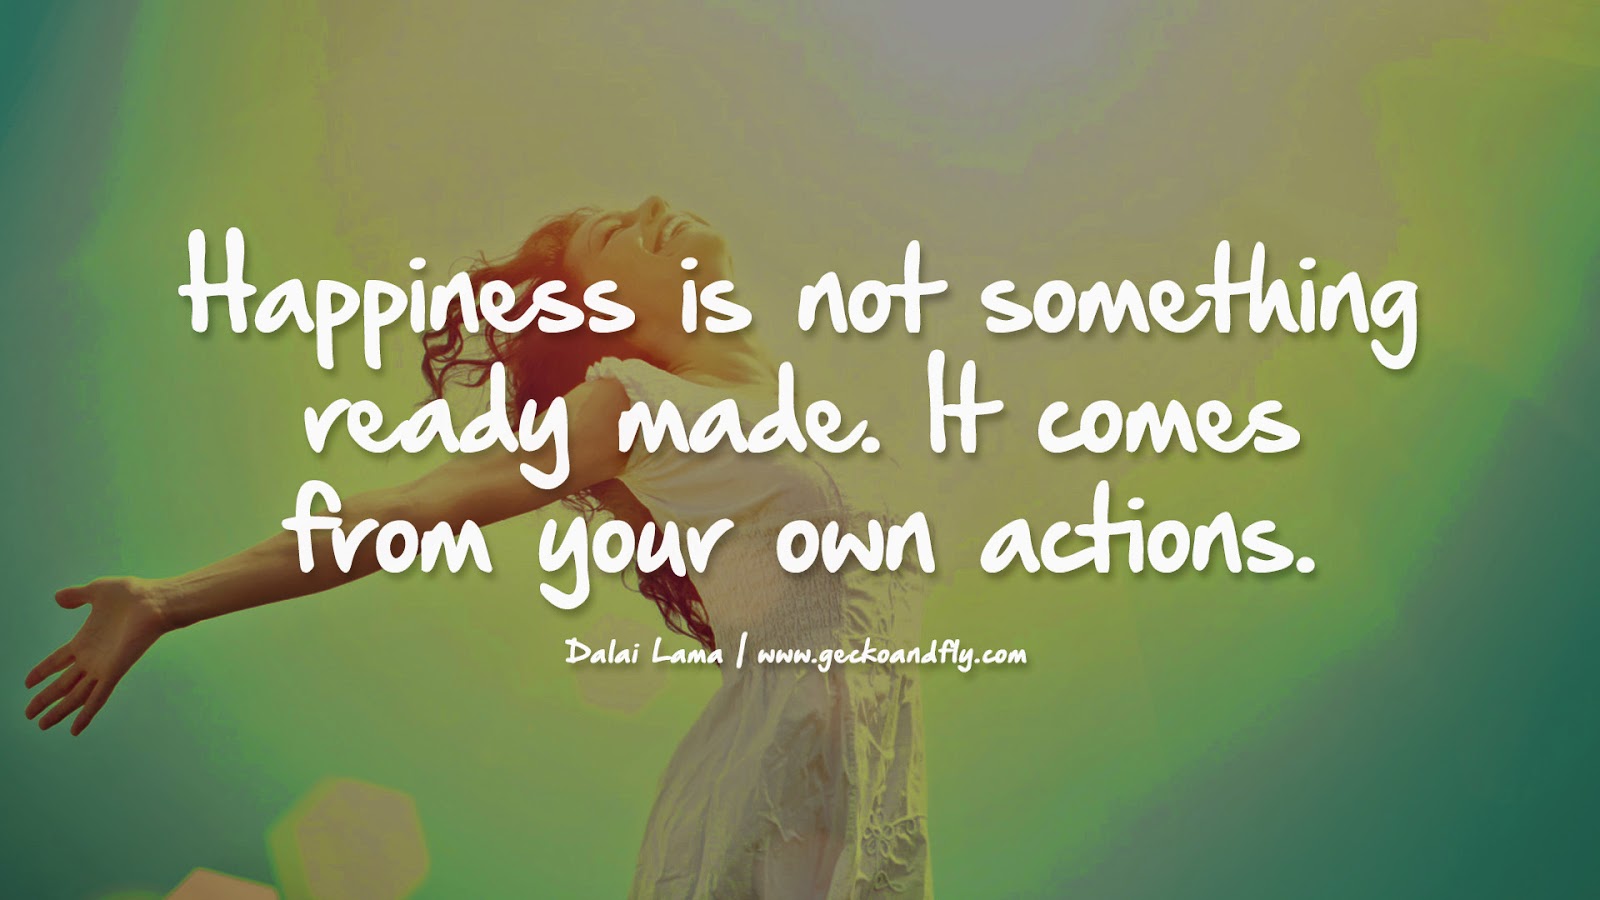 Image For Famous Happiness Quotes Wallpaper - Ten Quotes Of Likas Na Batas Moral - HD Wallpaper 